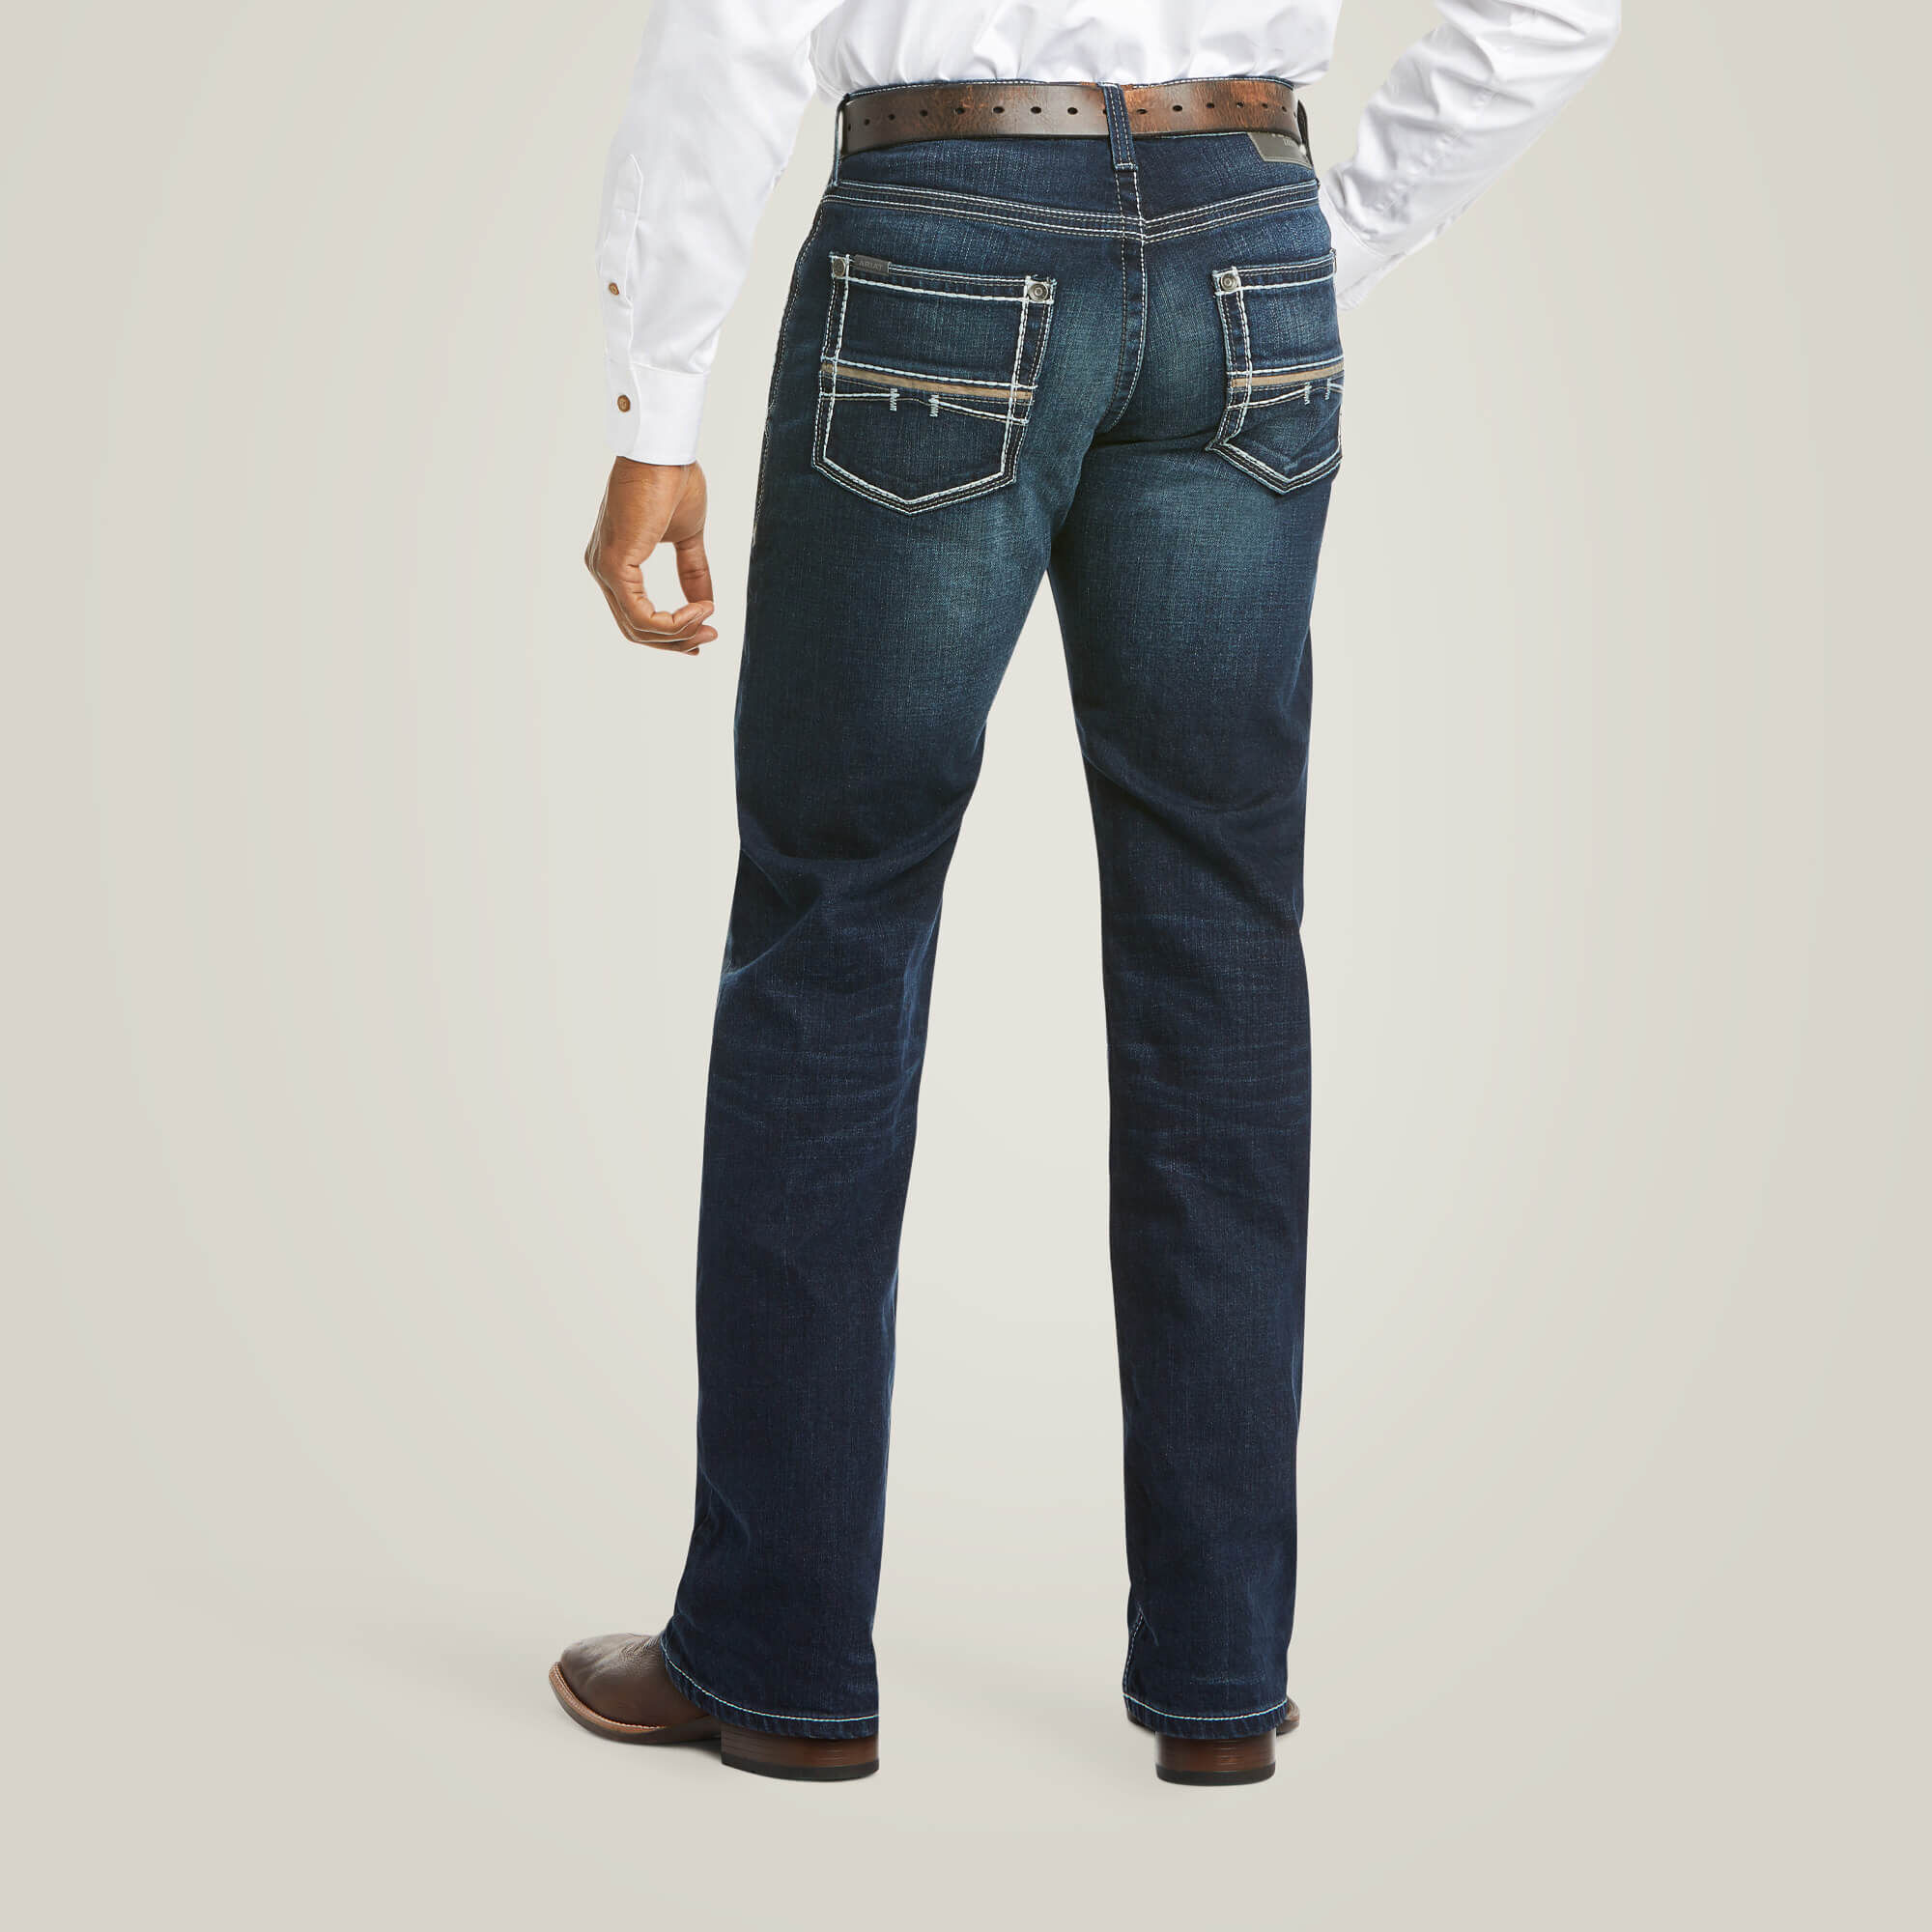 Men's M5 Slim Stretch Coltrane Stackable Straight Leg Jeans in Nightingale  Cotton, Size: 30 X 32 by Ariat